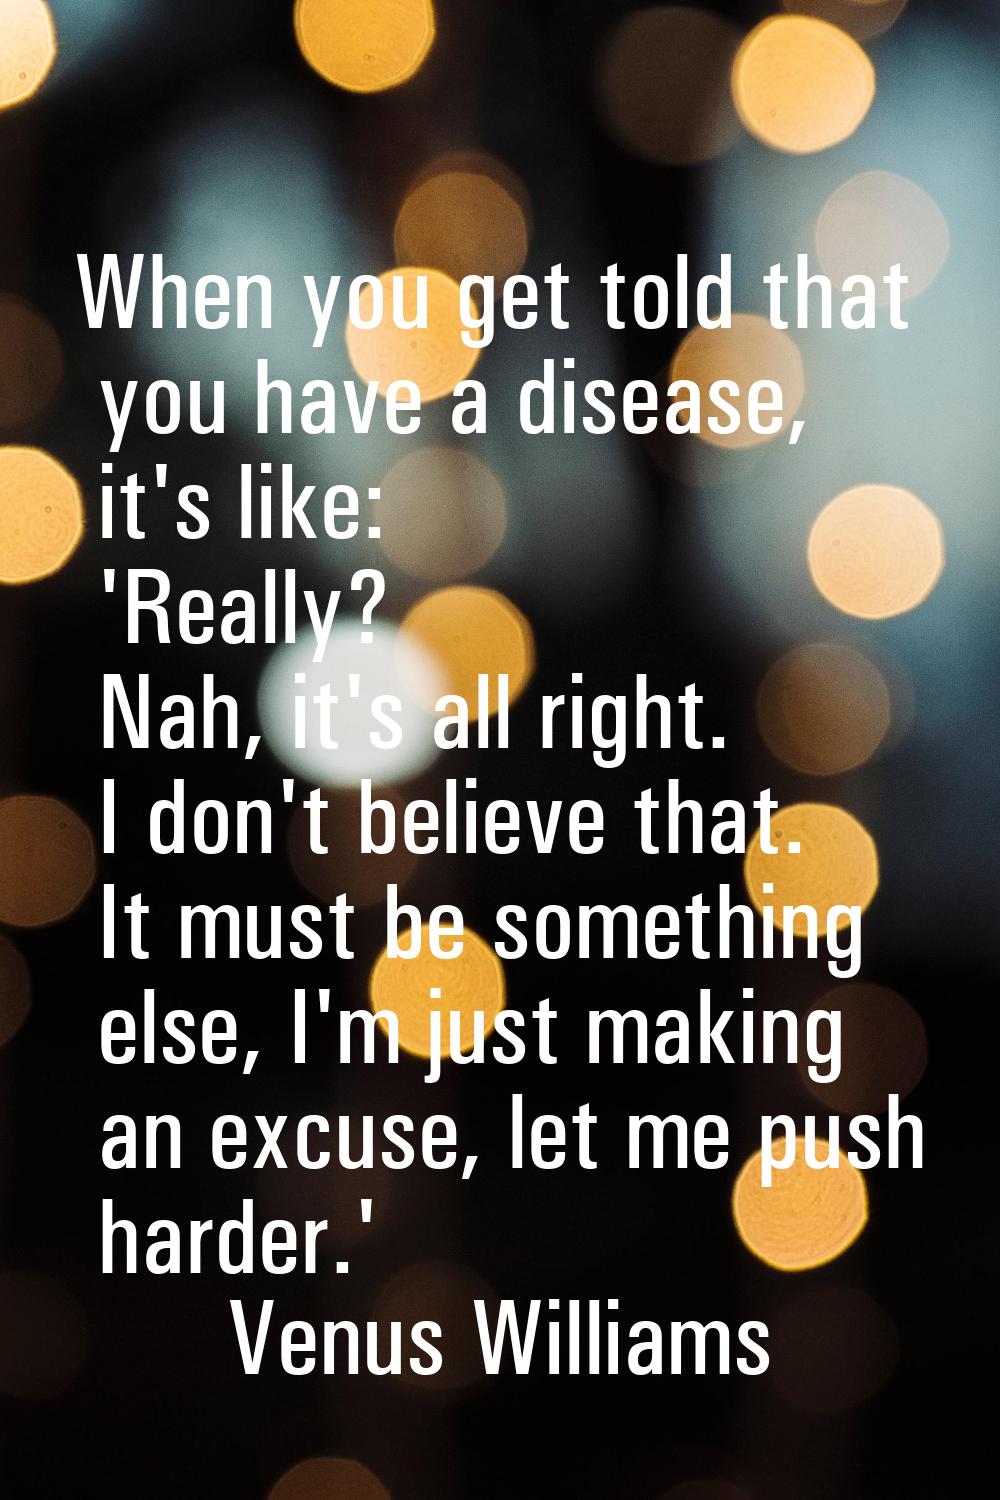 When you get told that you have a disease, it's like: 'Really? Nah, it's all right. I don't believe